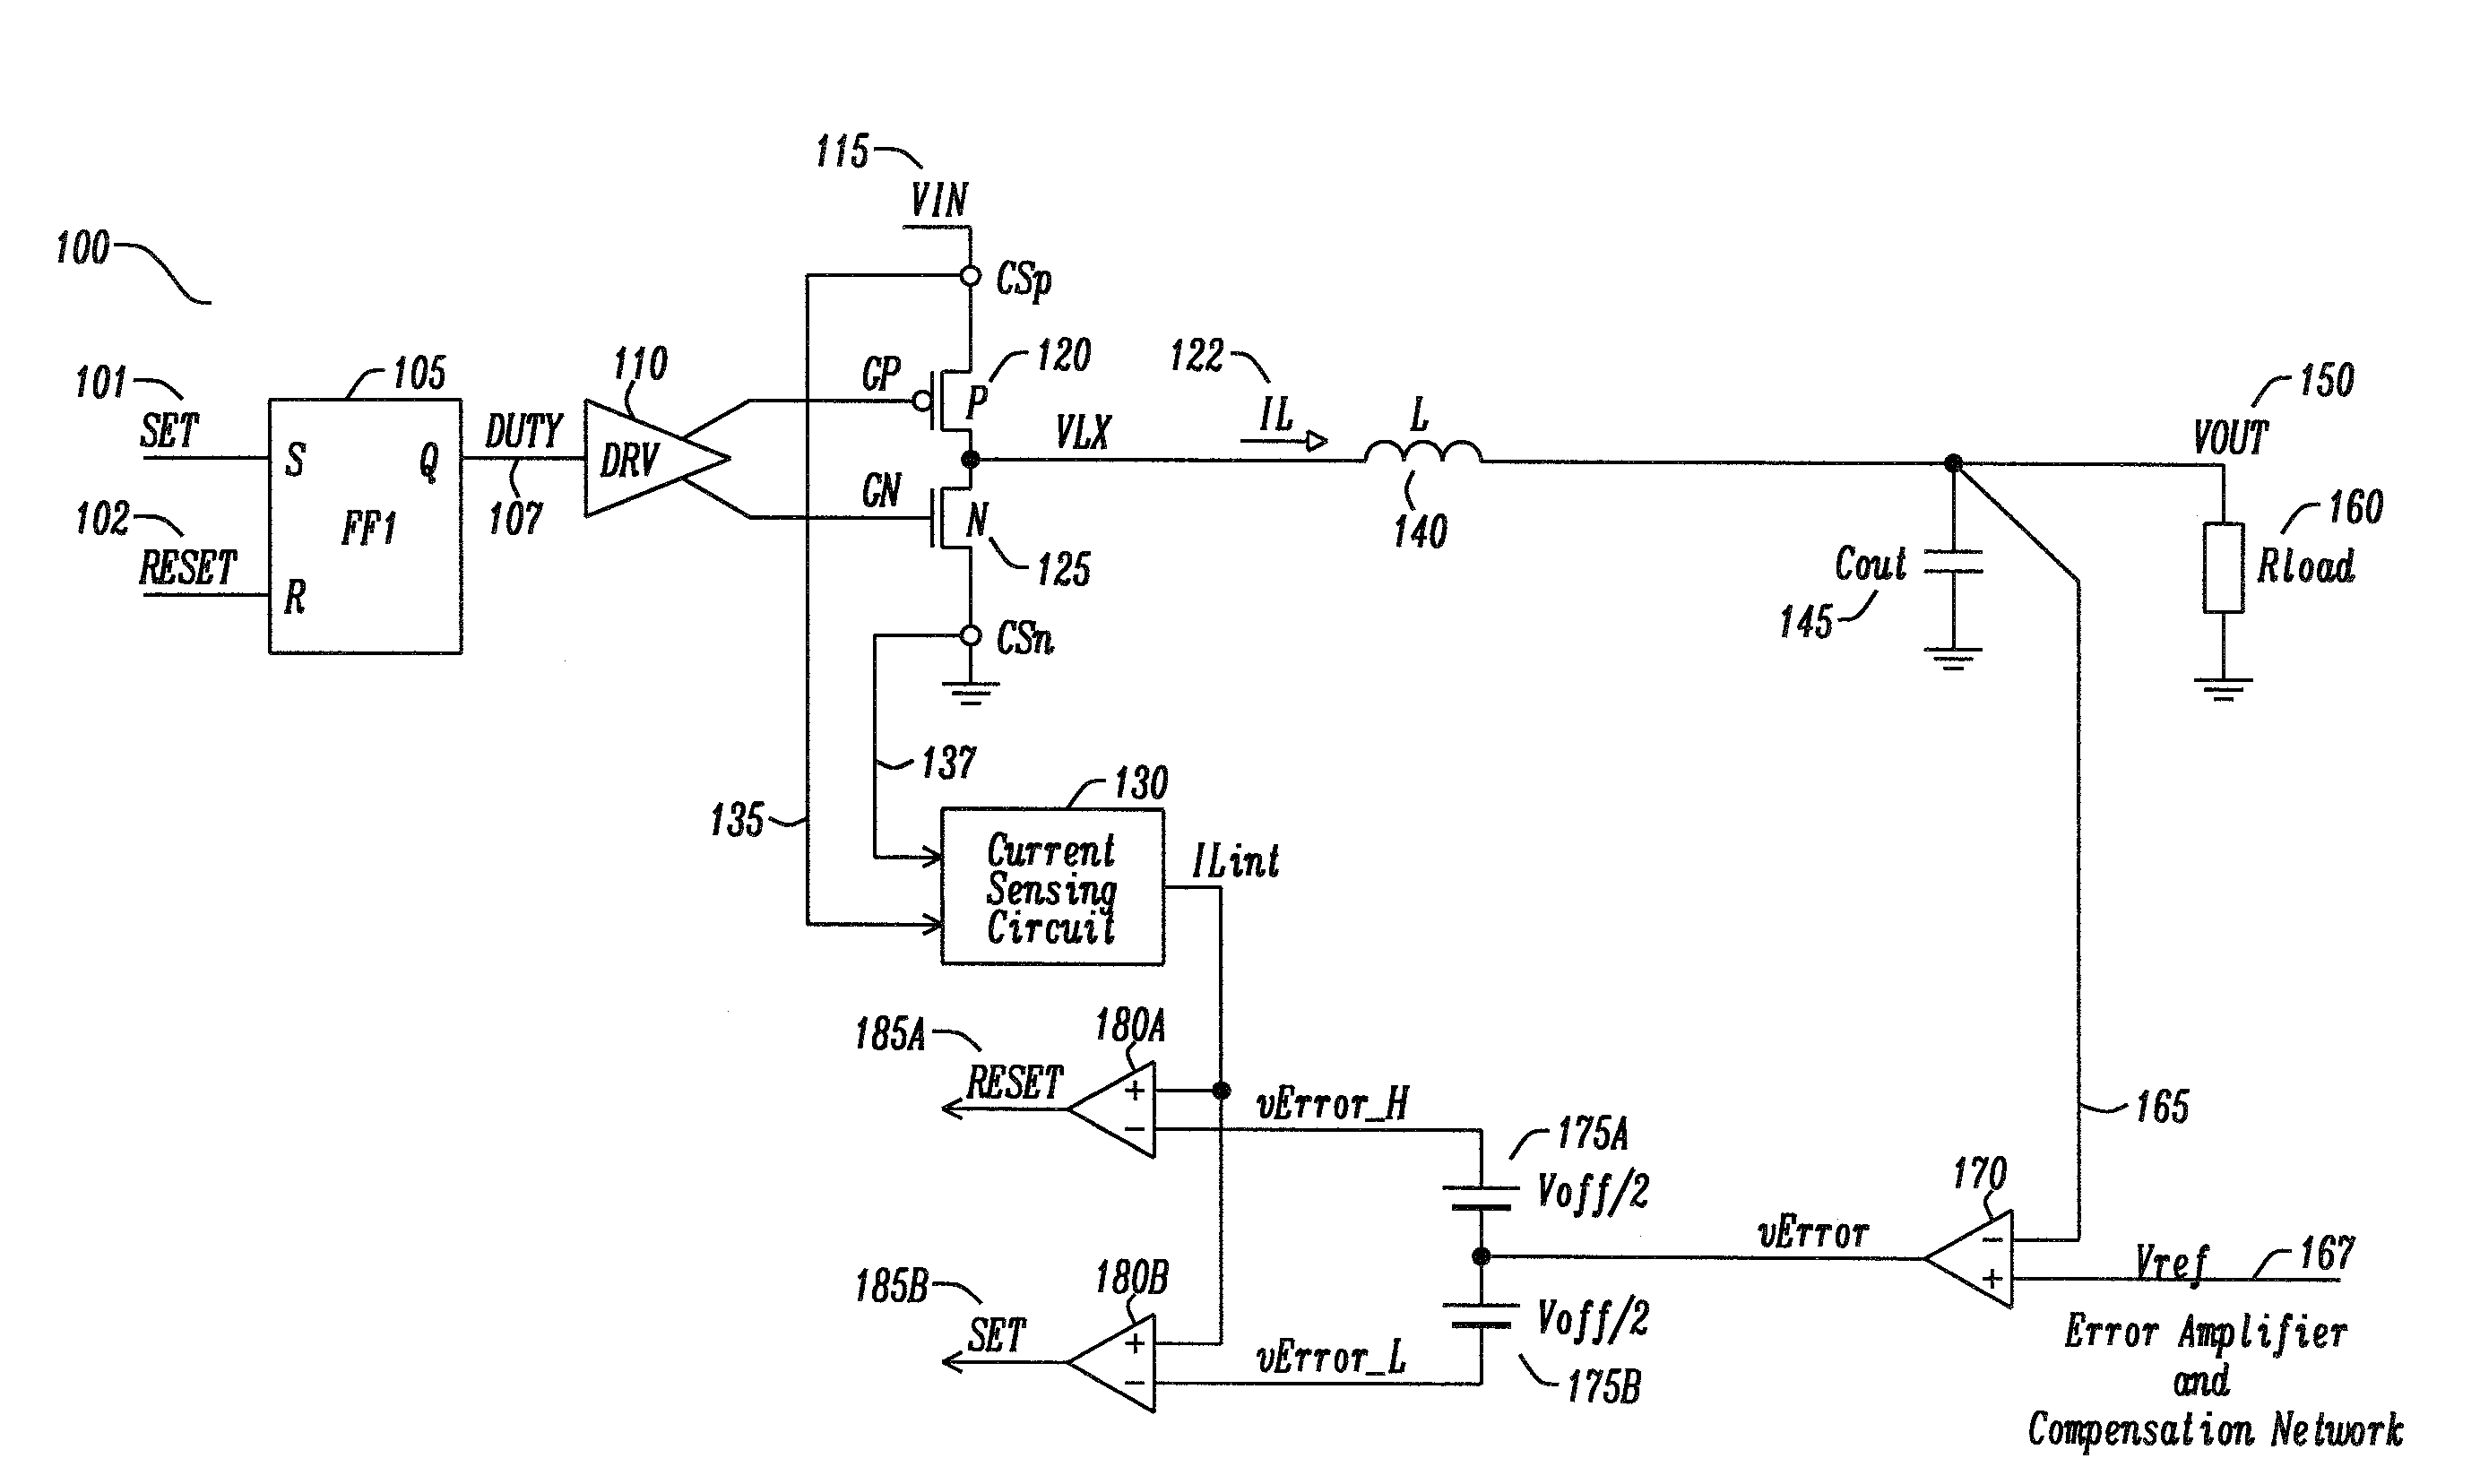 Control Scheme for Hysteretic Buck Controller with Inductor Coil Current Estimation